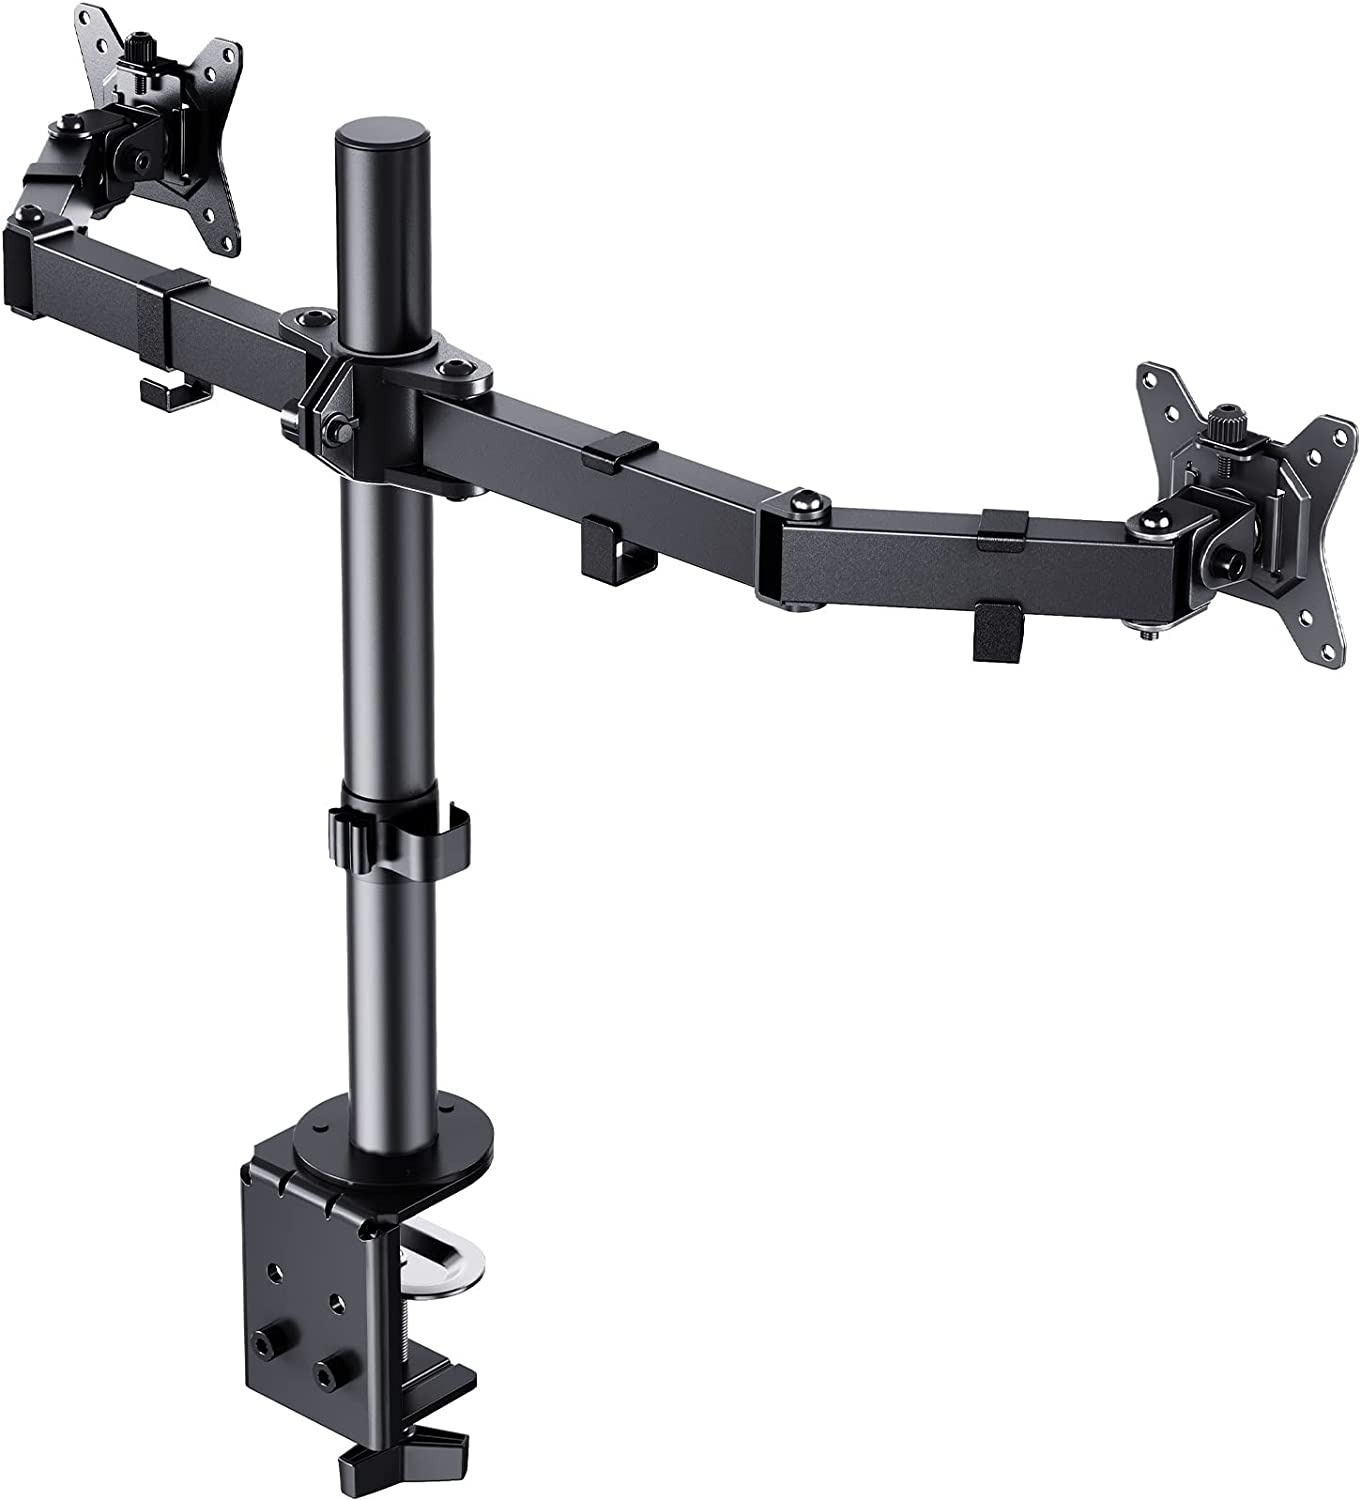 Ergear Dual Monitor Stand (13" - 32" Monitors, Up to 17.6lbs) + Free Shipping w/ Prime or $25+ orders $15.17